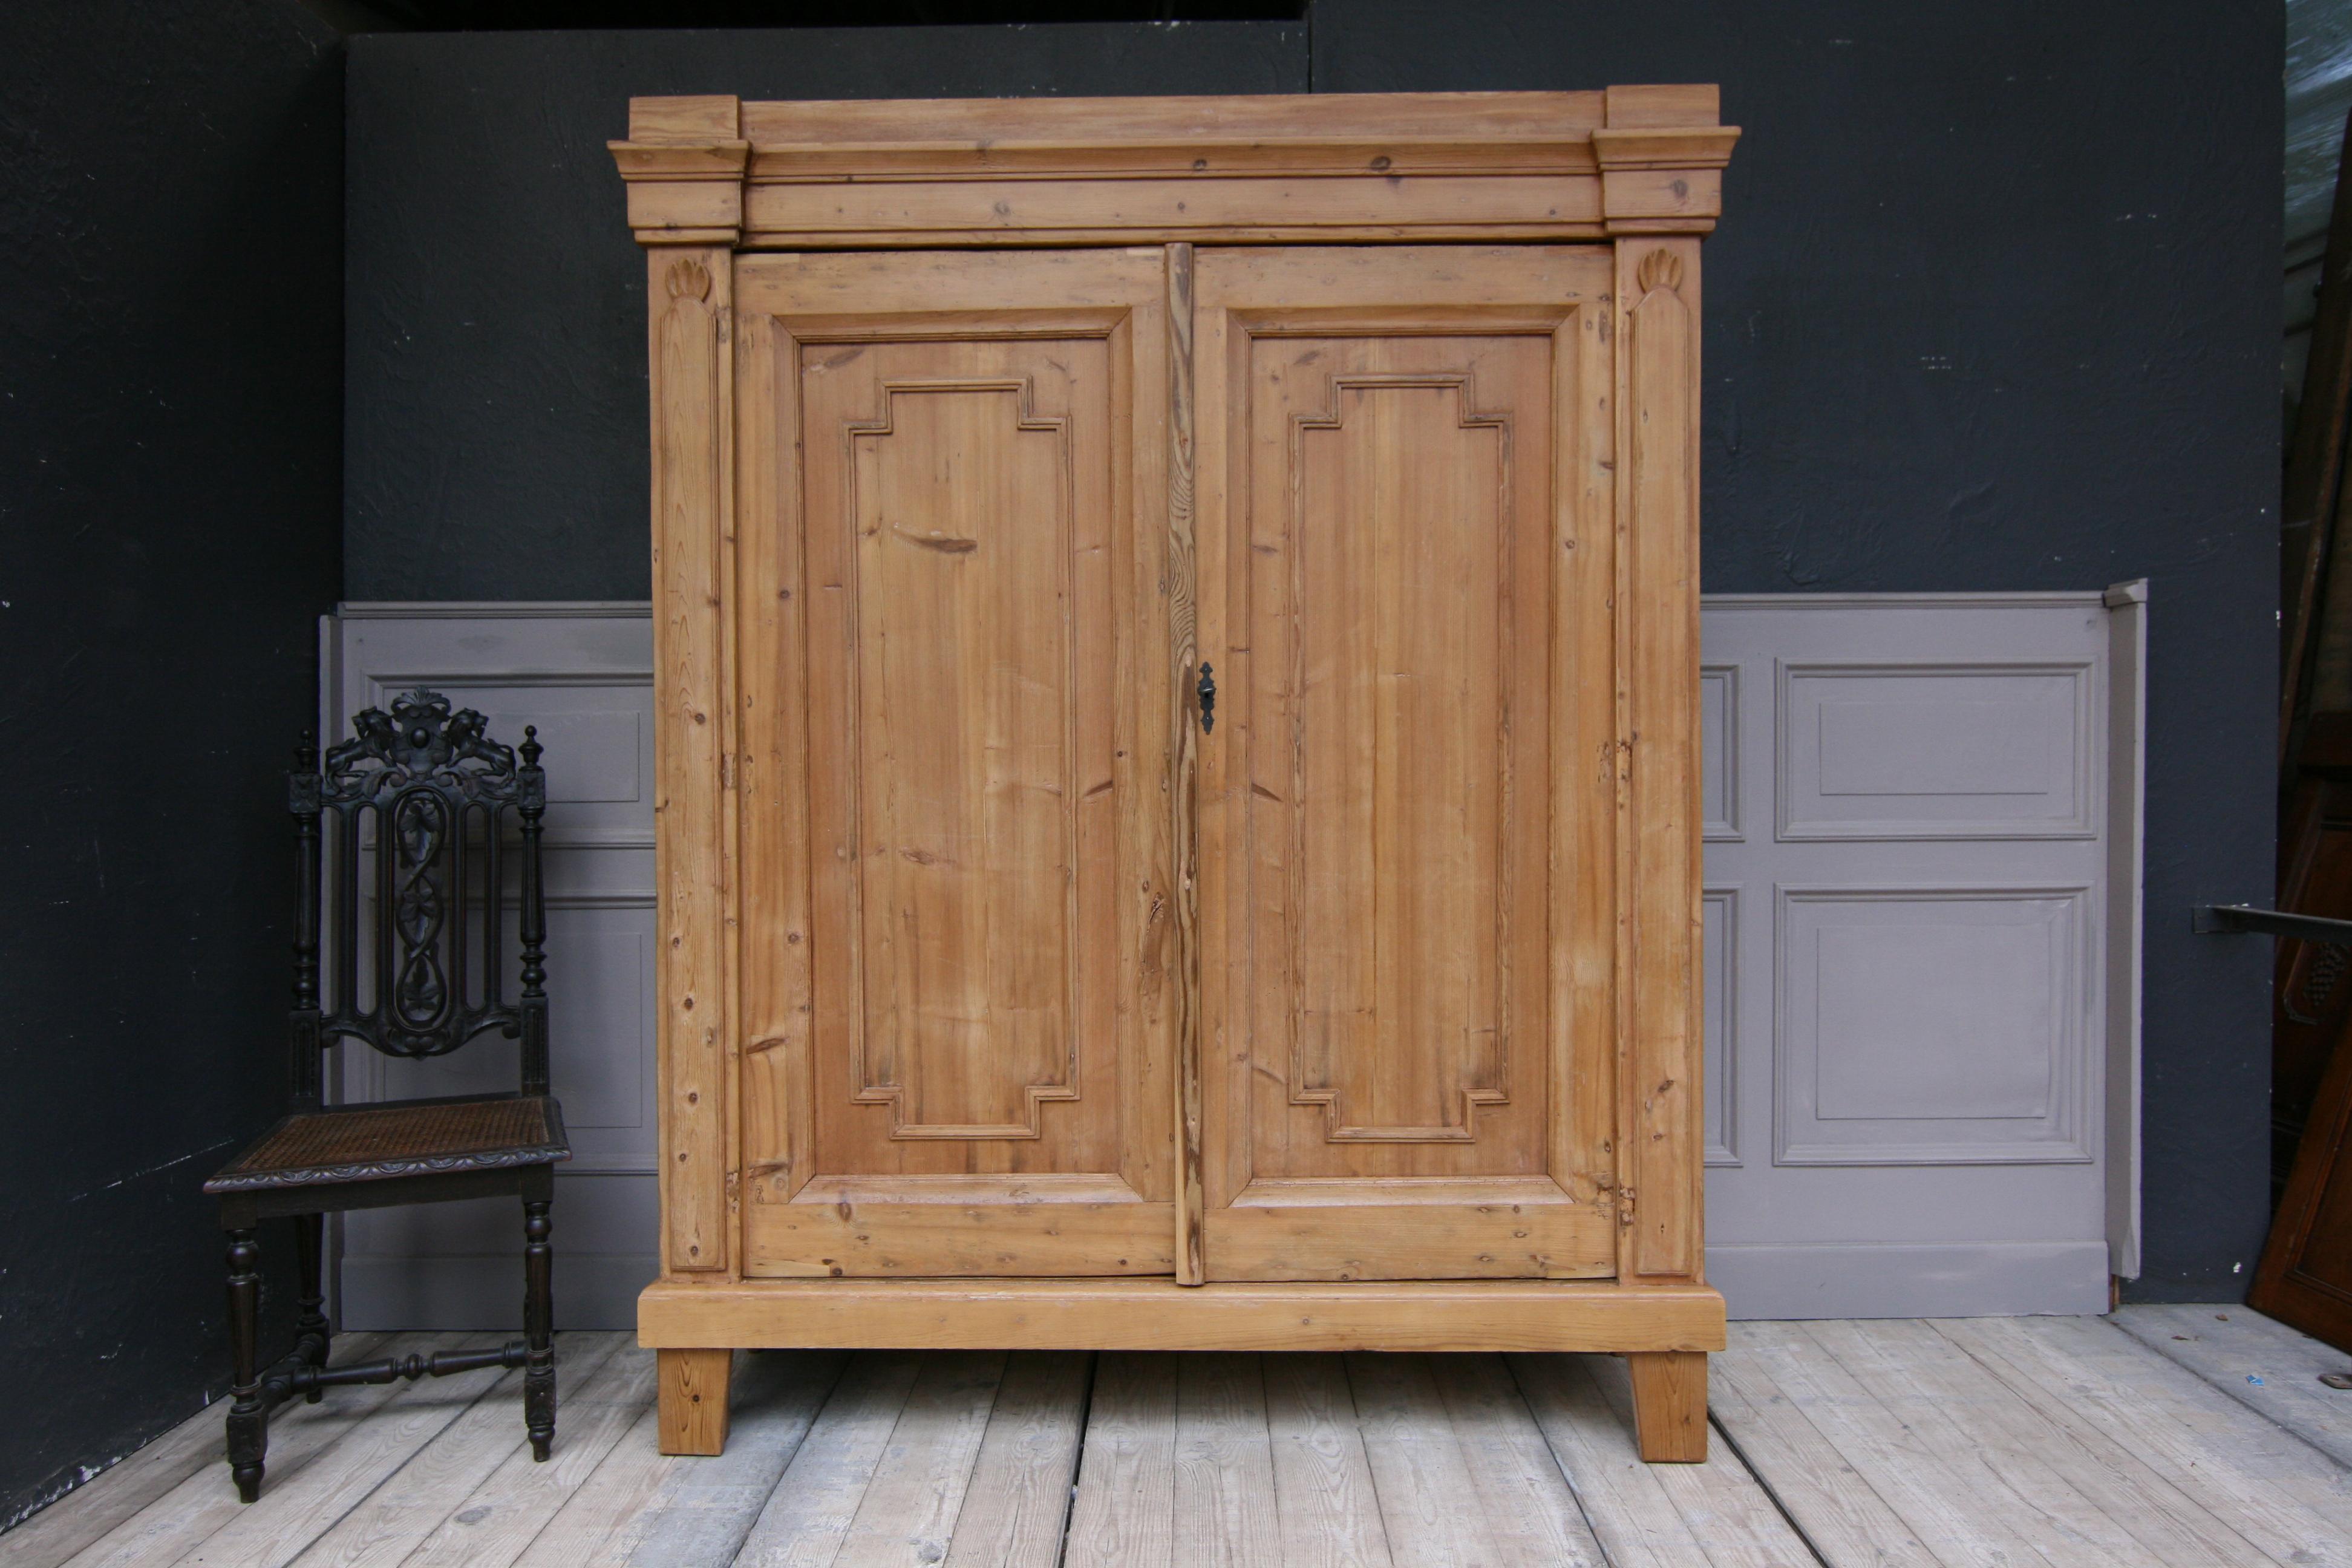 Provincial cabinet from Germany made of solid pine, circa from 1820.

 Four fixed shelves inside.

 Dimensions:
 195 cm high / 76.77 inch high, 
158 cm wide / 62.21 inch wide,
 53 or 57 (incl. header) cm deep / 20.87 or 22.44 (incl. header)